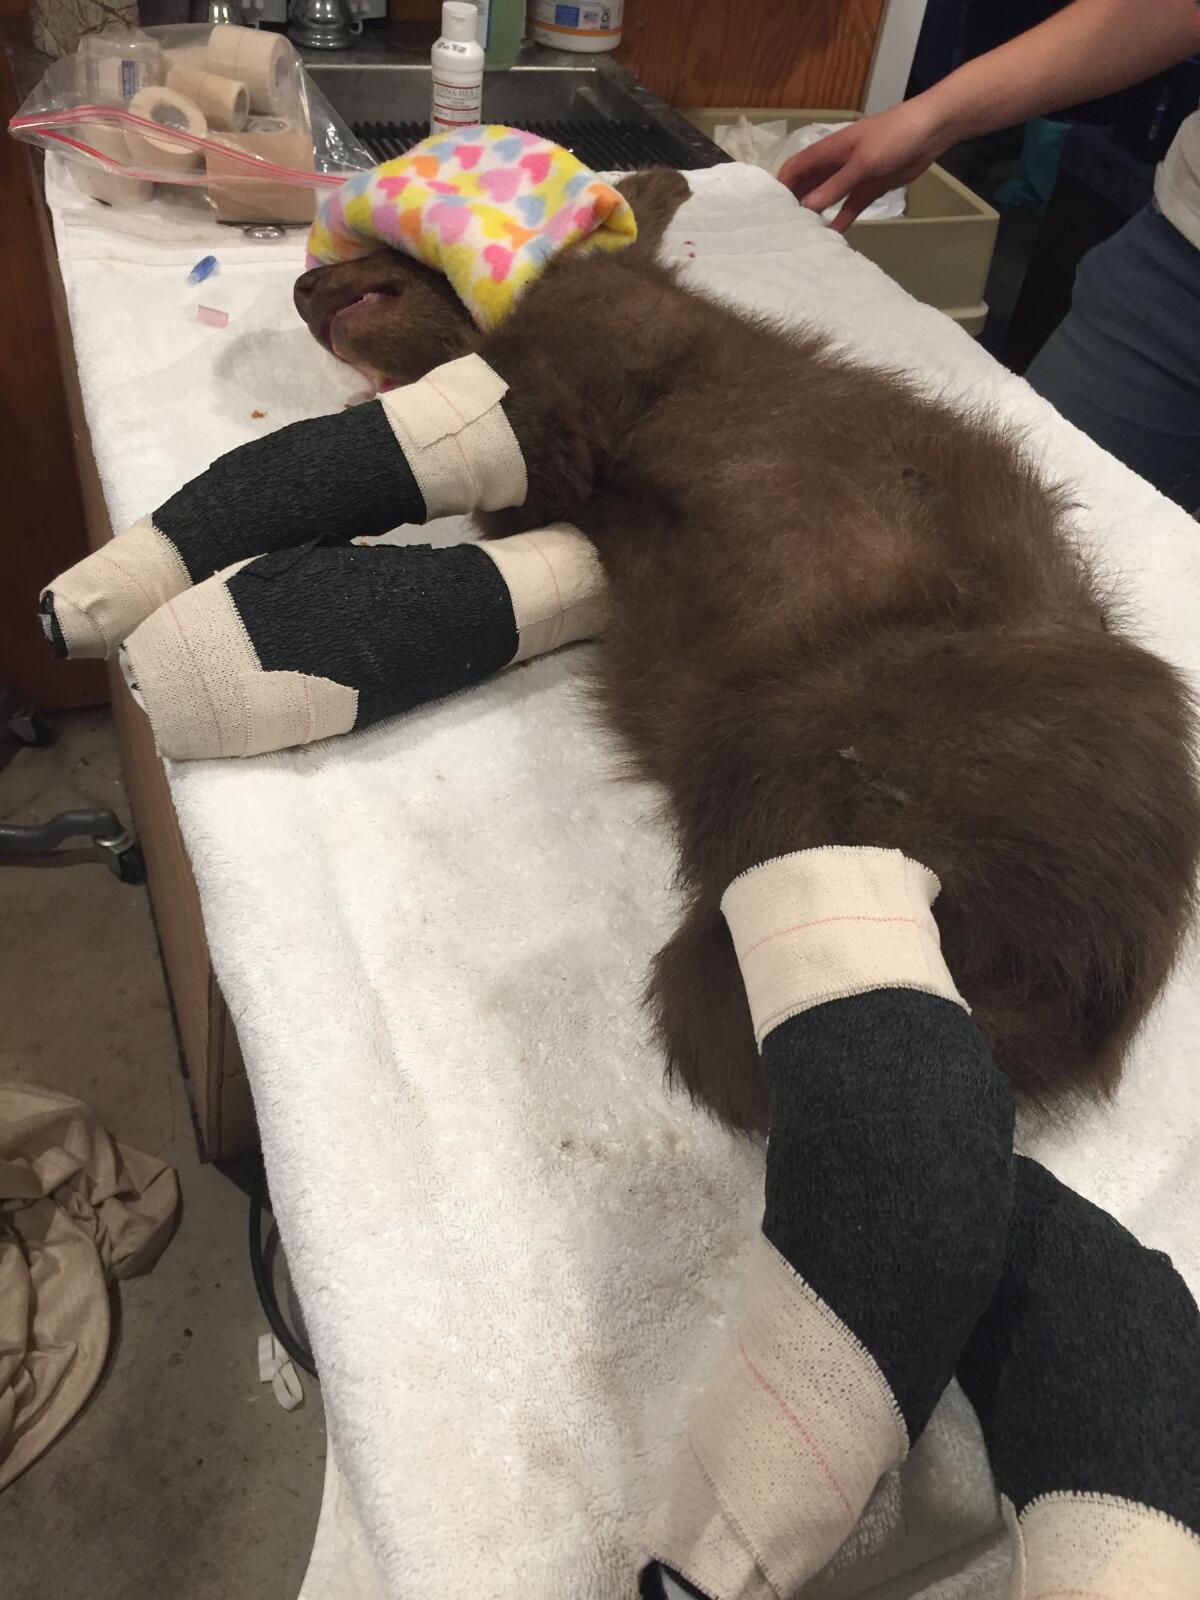 A bear lies on a table with a cloth over its face and all four paws bandaged.